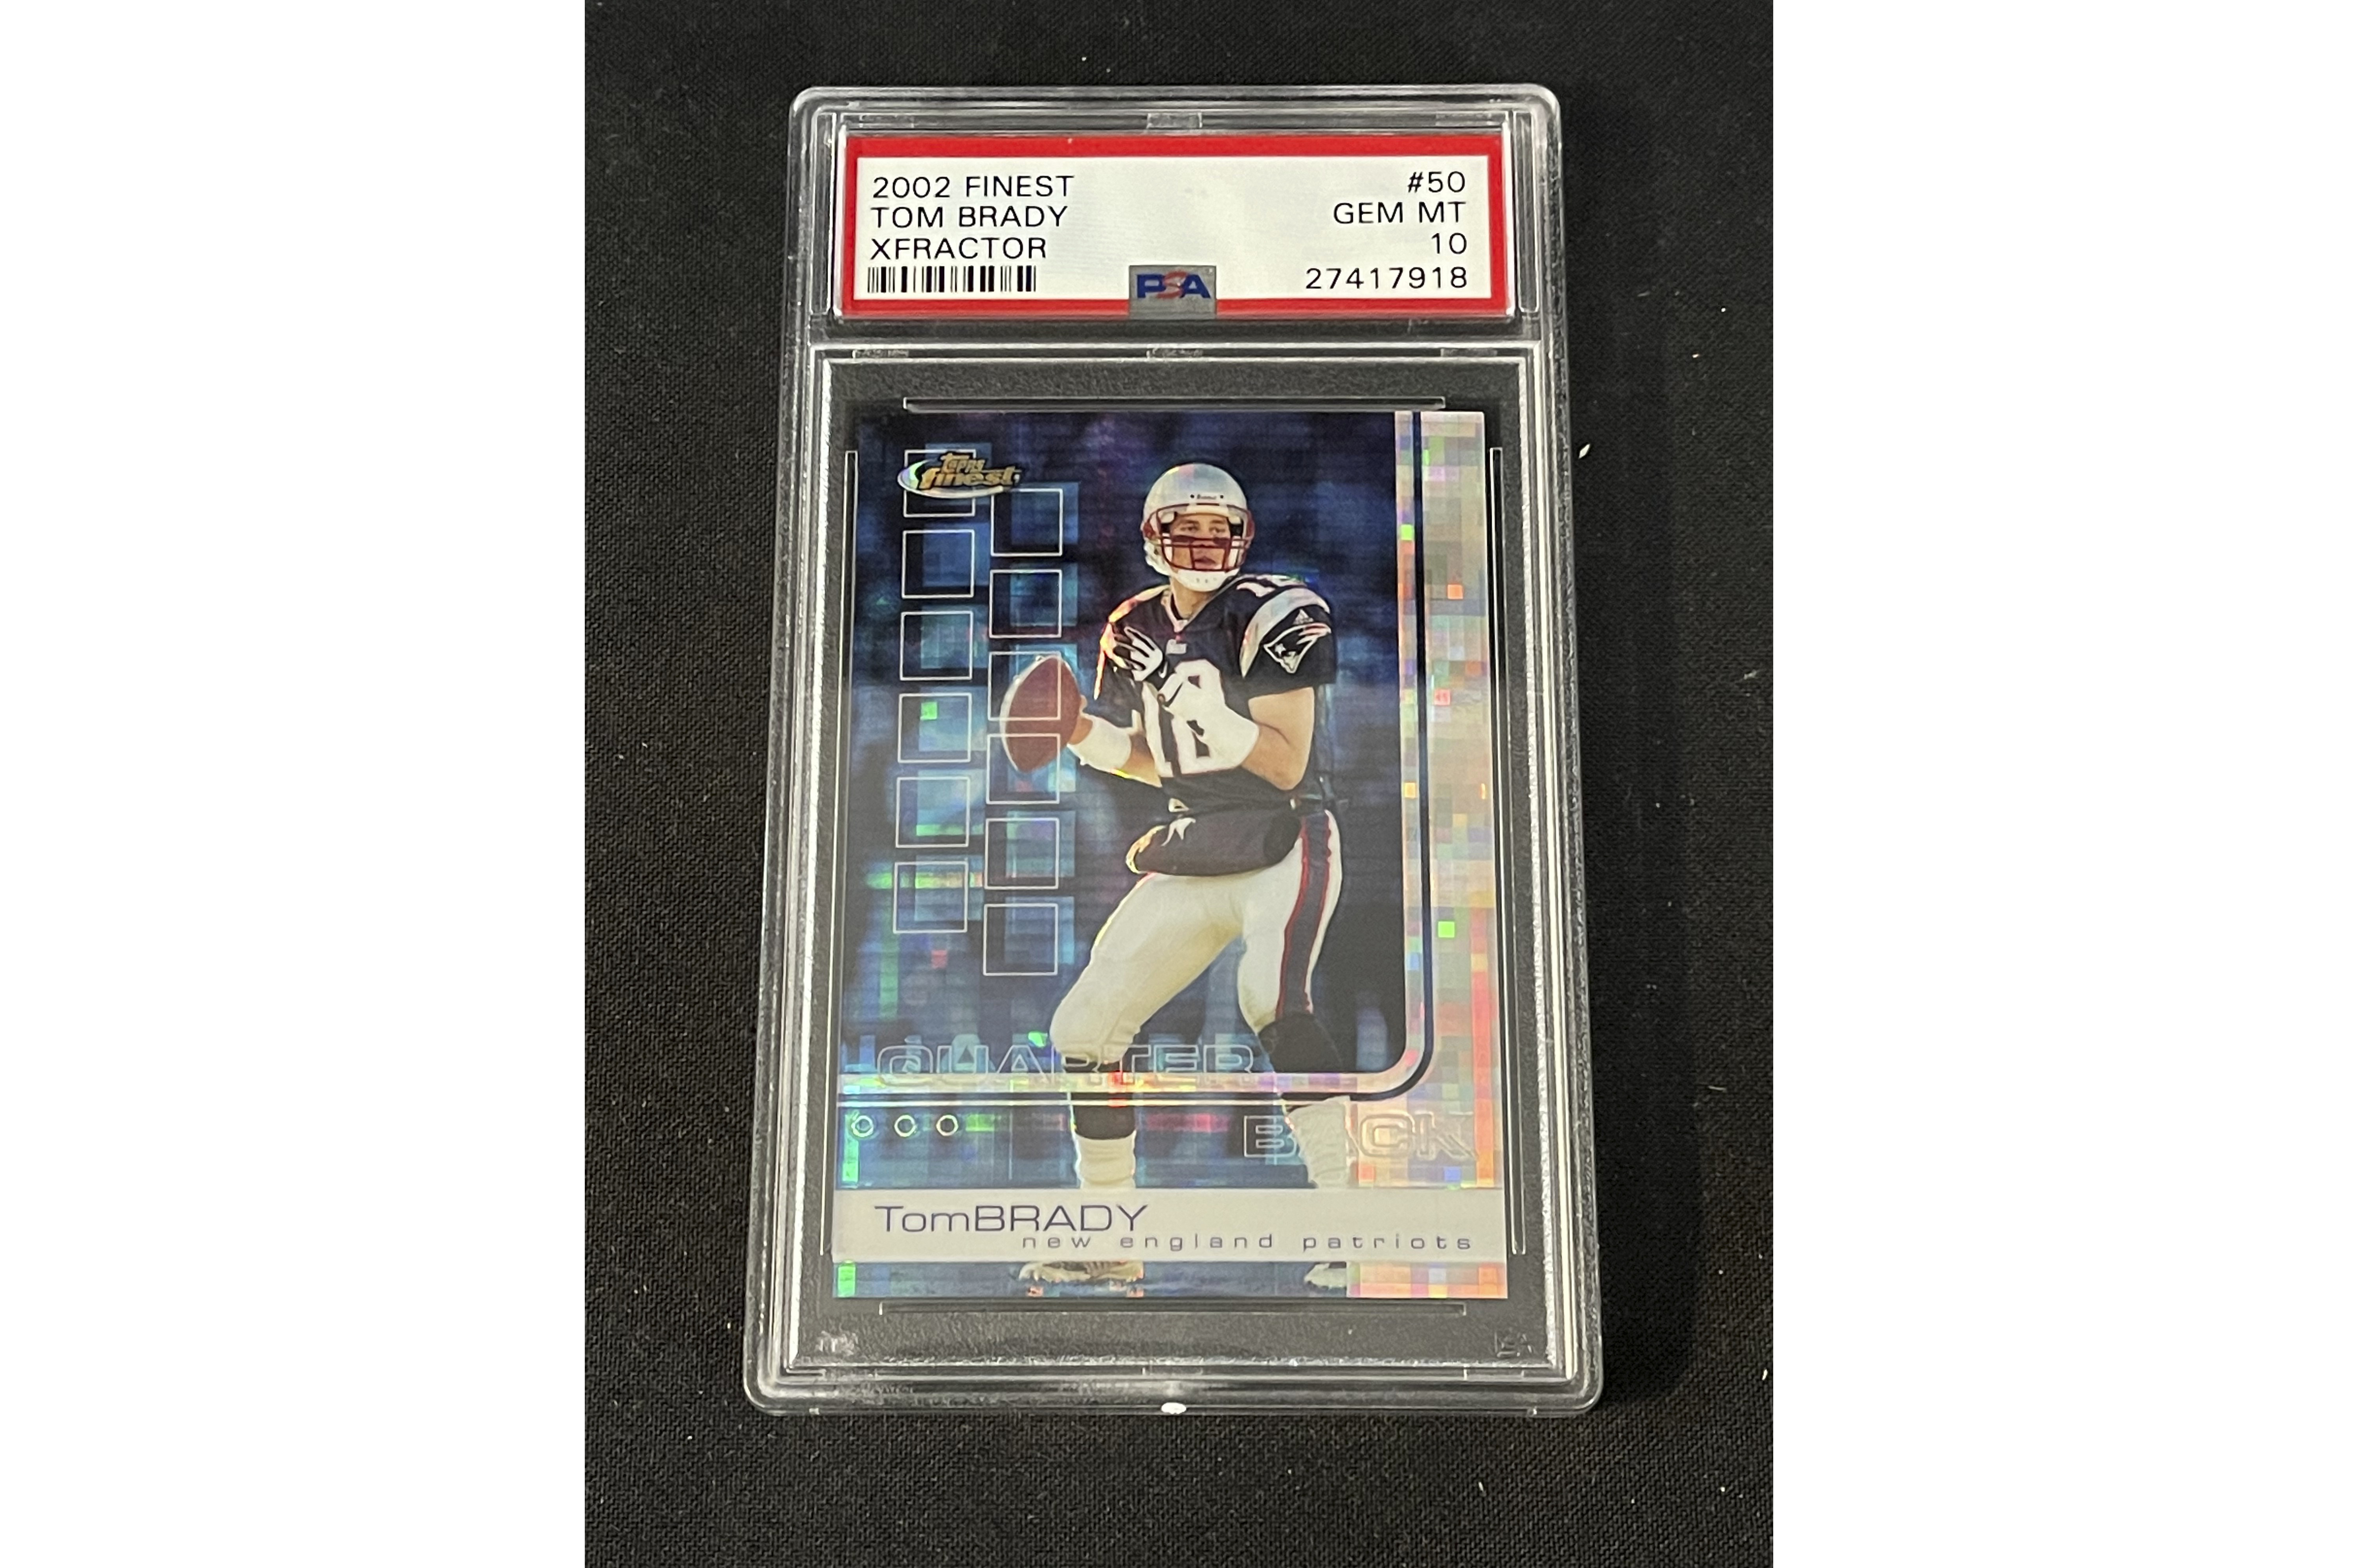 Rare Tom Brady card from first Super Bowl year to be auctioned - The Boston  Globe